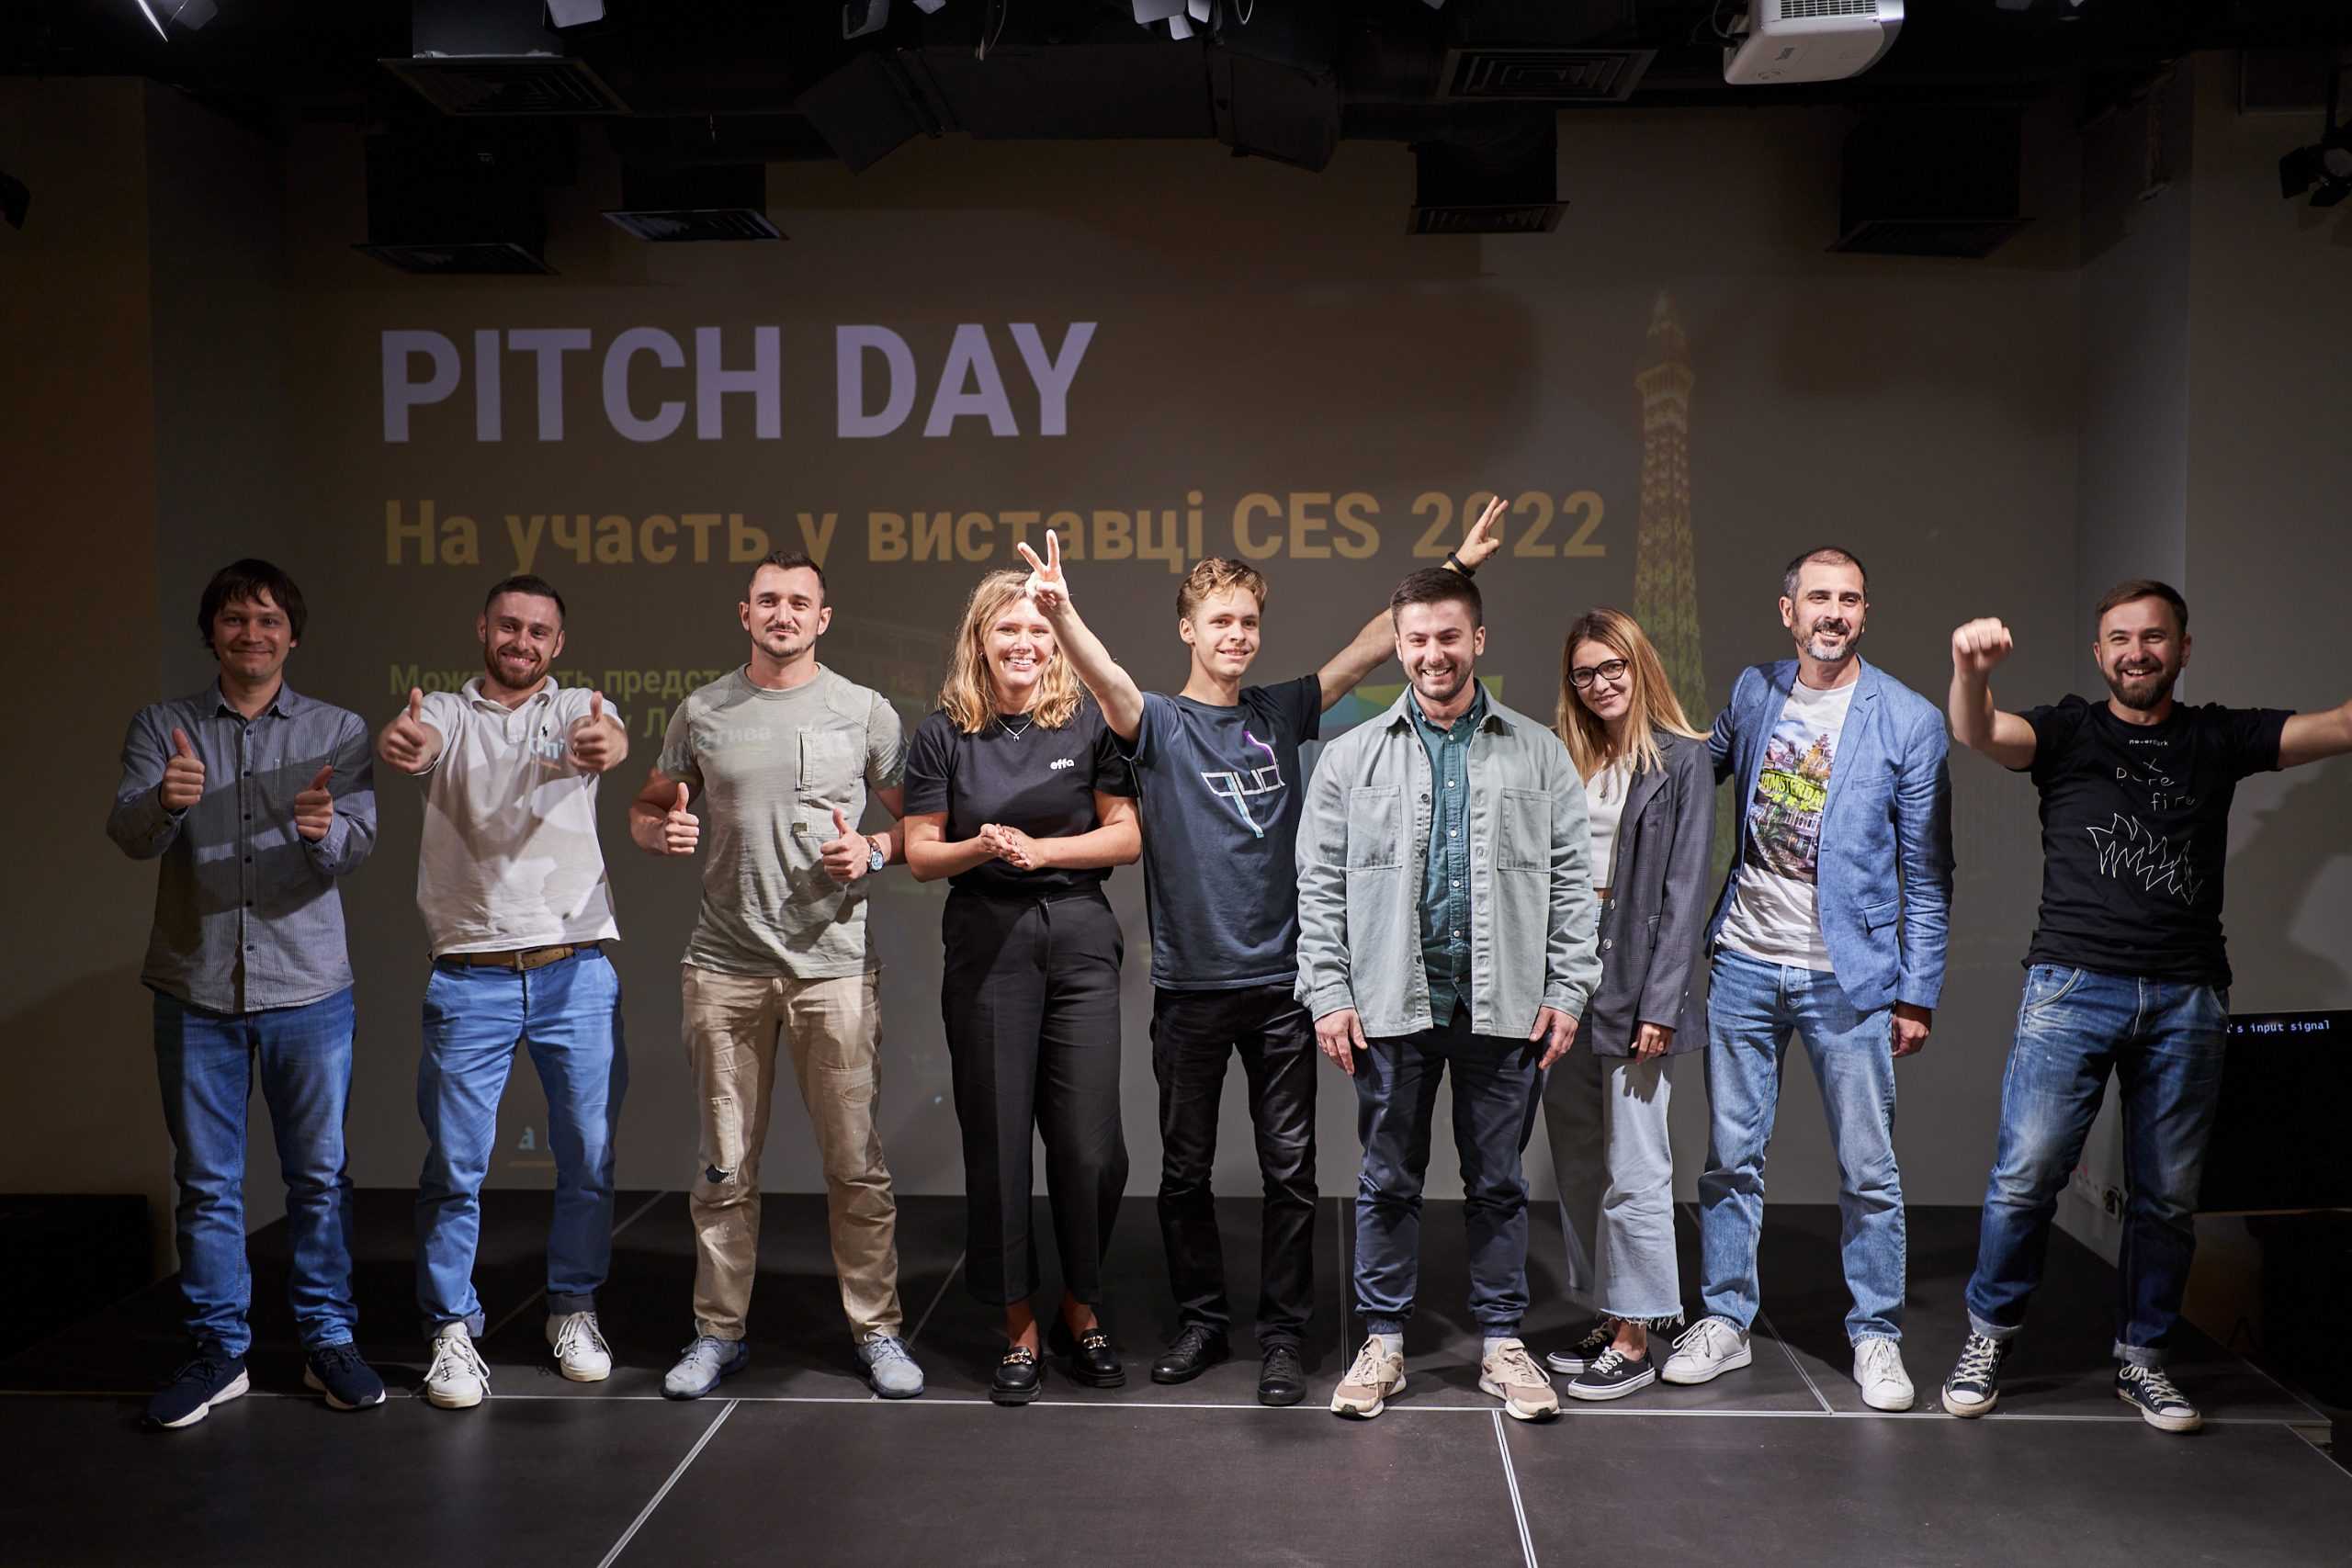 PITCH DAY STARTUP WINNERS ANNOUNCED FOR PARTICIPATION IN CES 2022